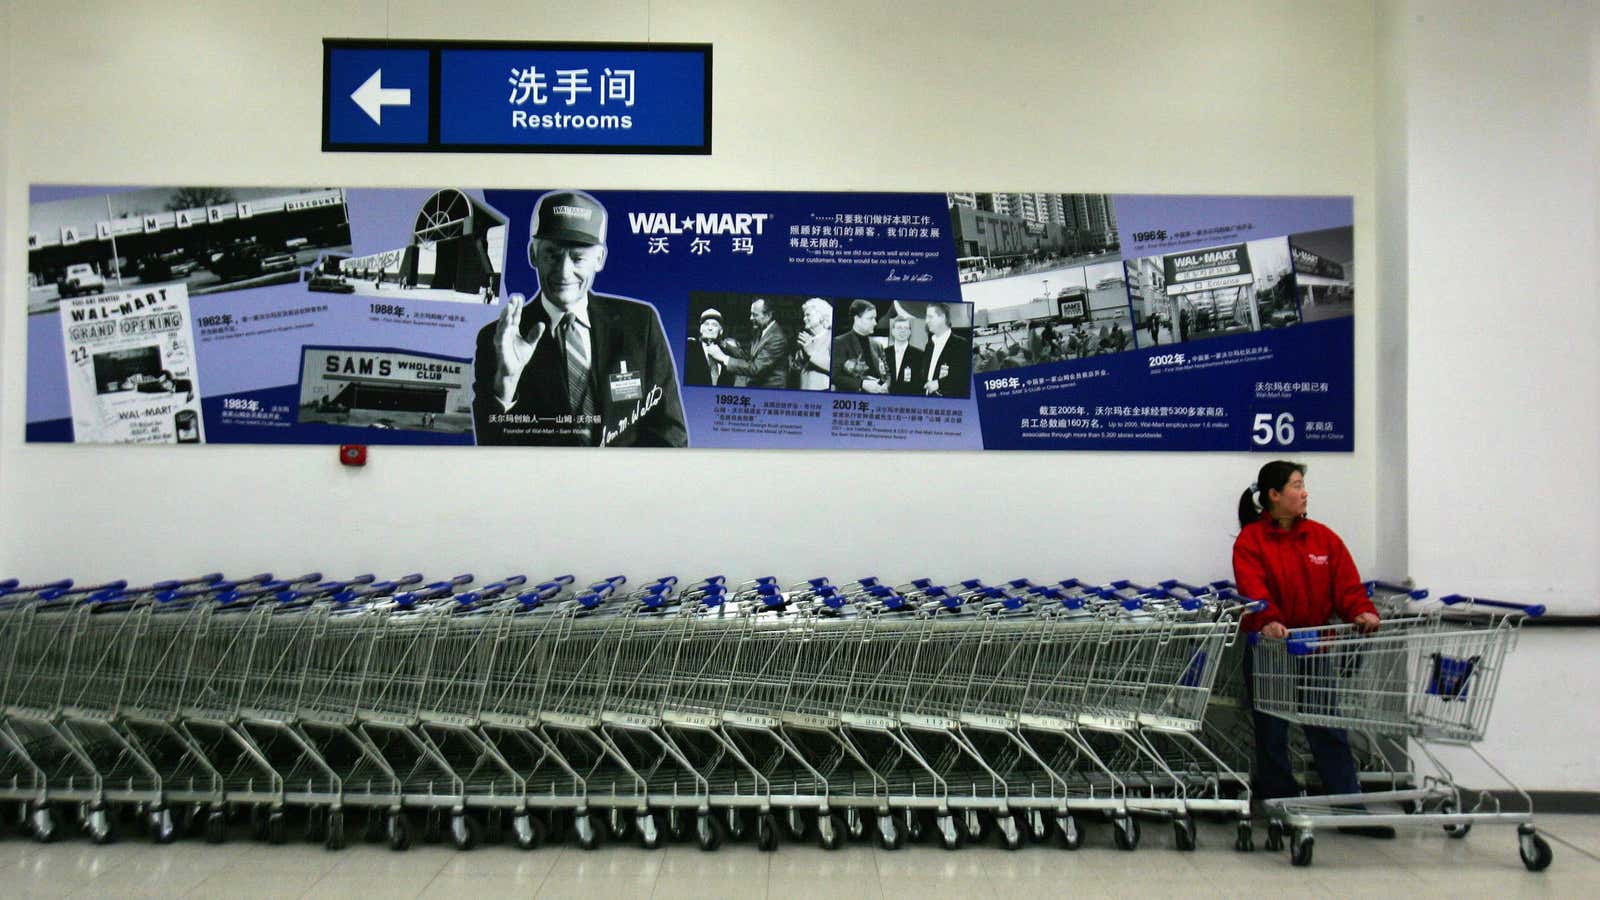 Does Chinese state television have Wal-Mart in its sights?